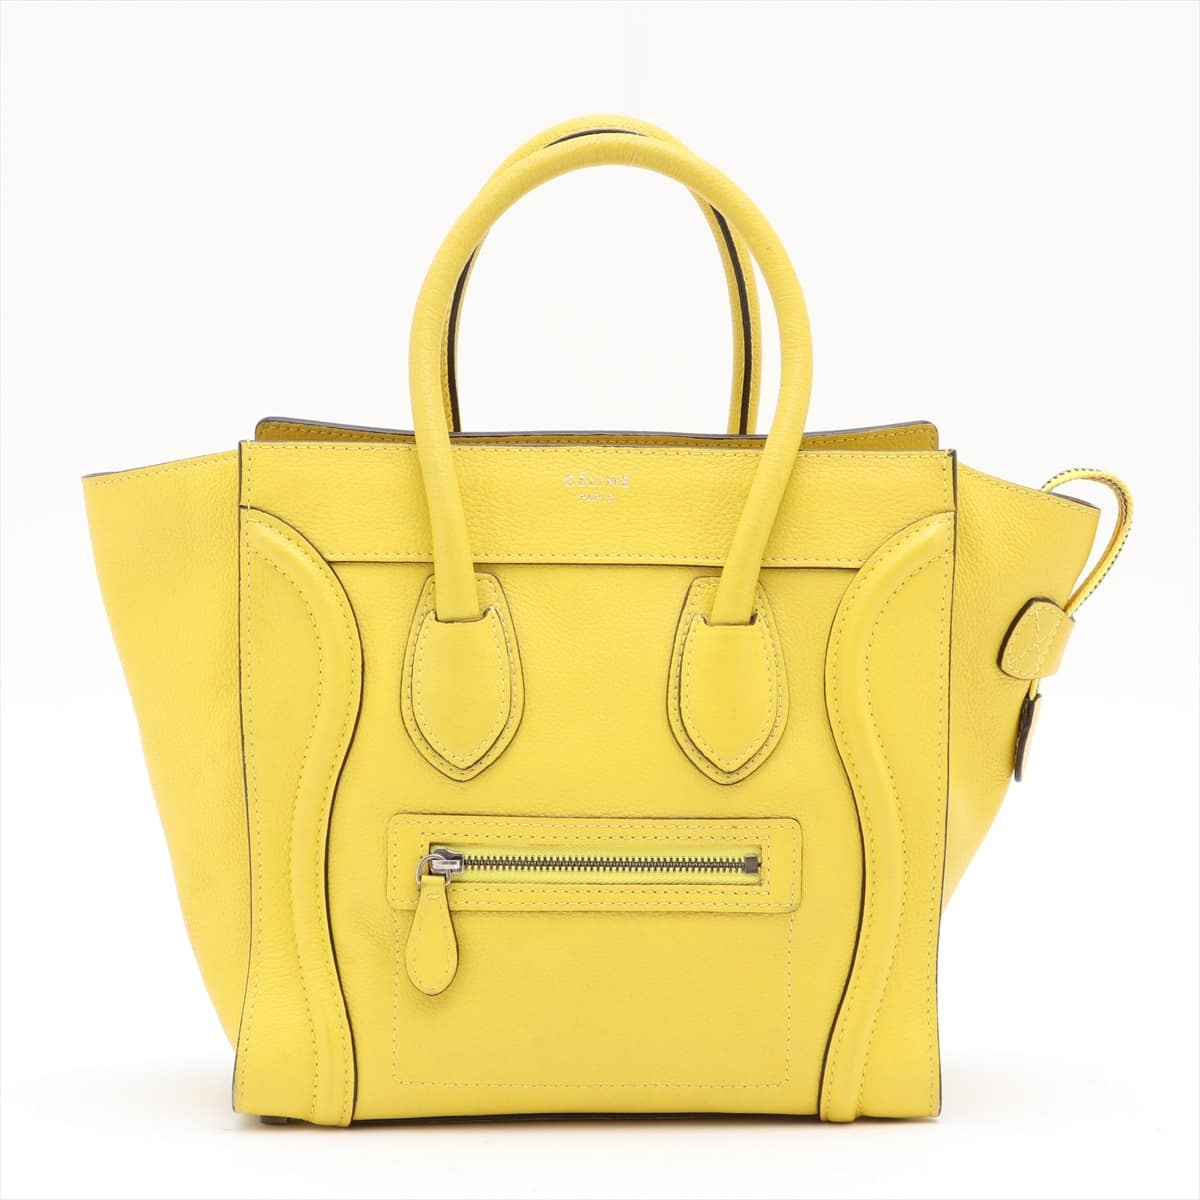 CELINE Luggage Micro Shopper Leather Hand bag Yellow